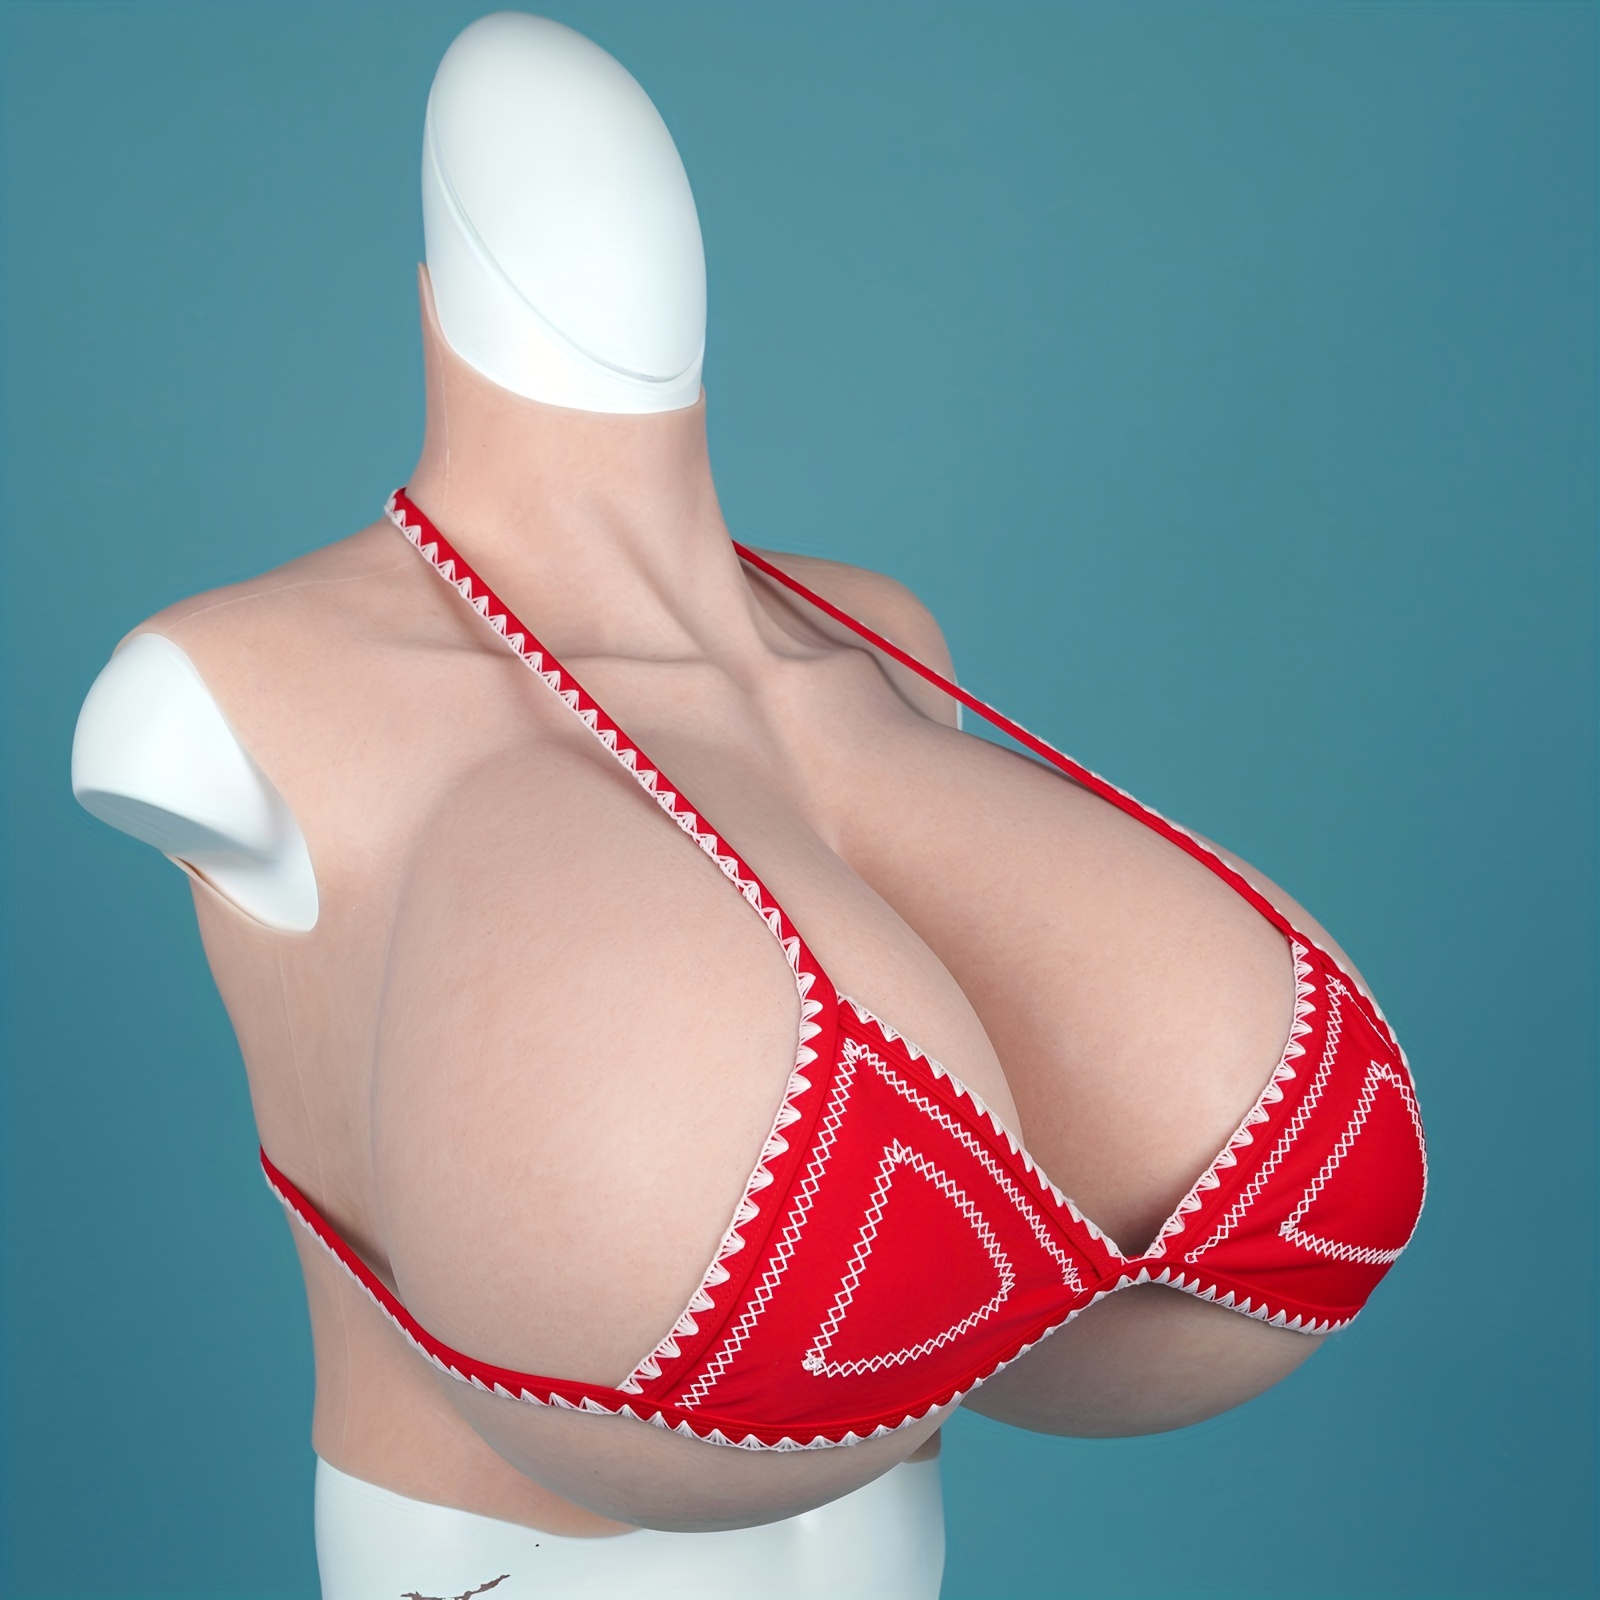 Z cup Huge Silicone Breast Forms – The Drag Queen Store